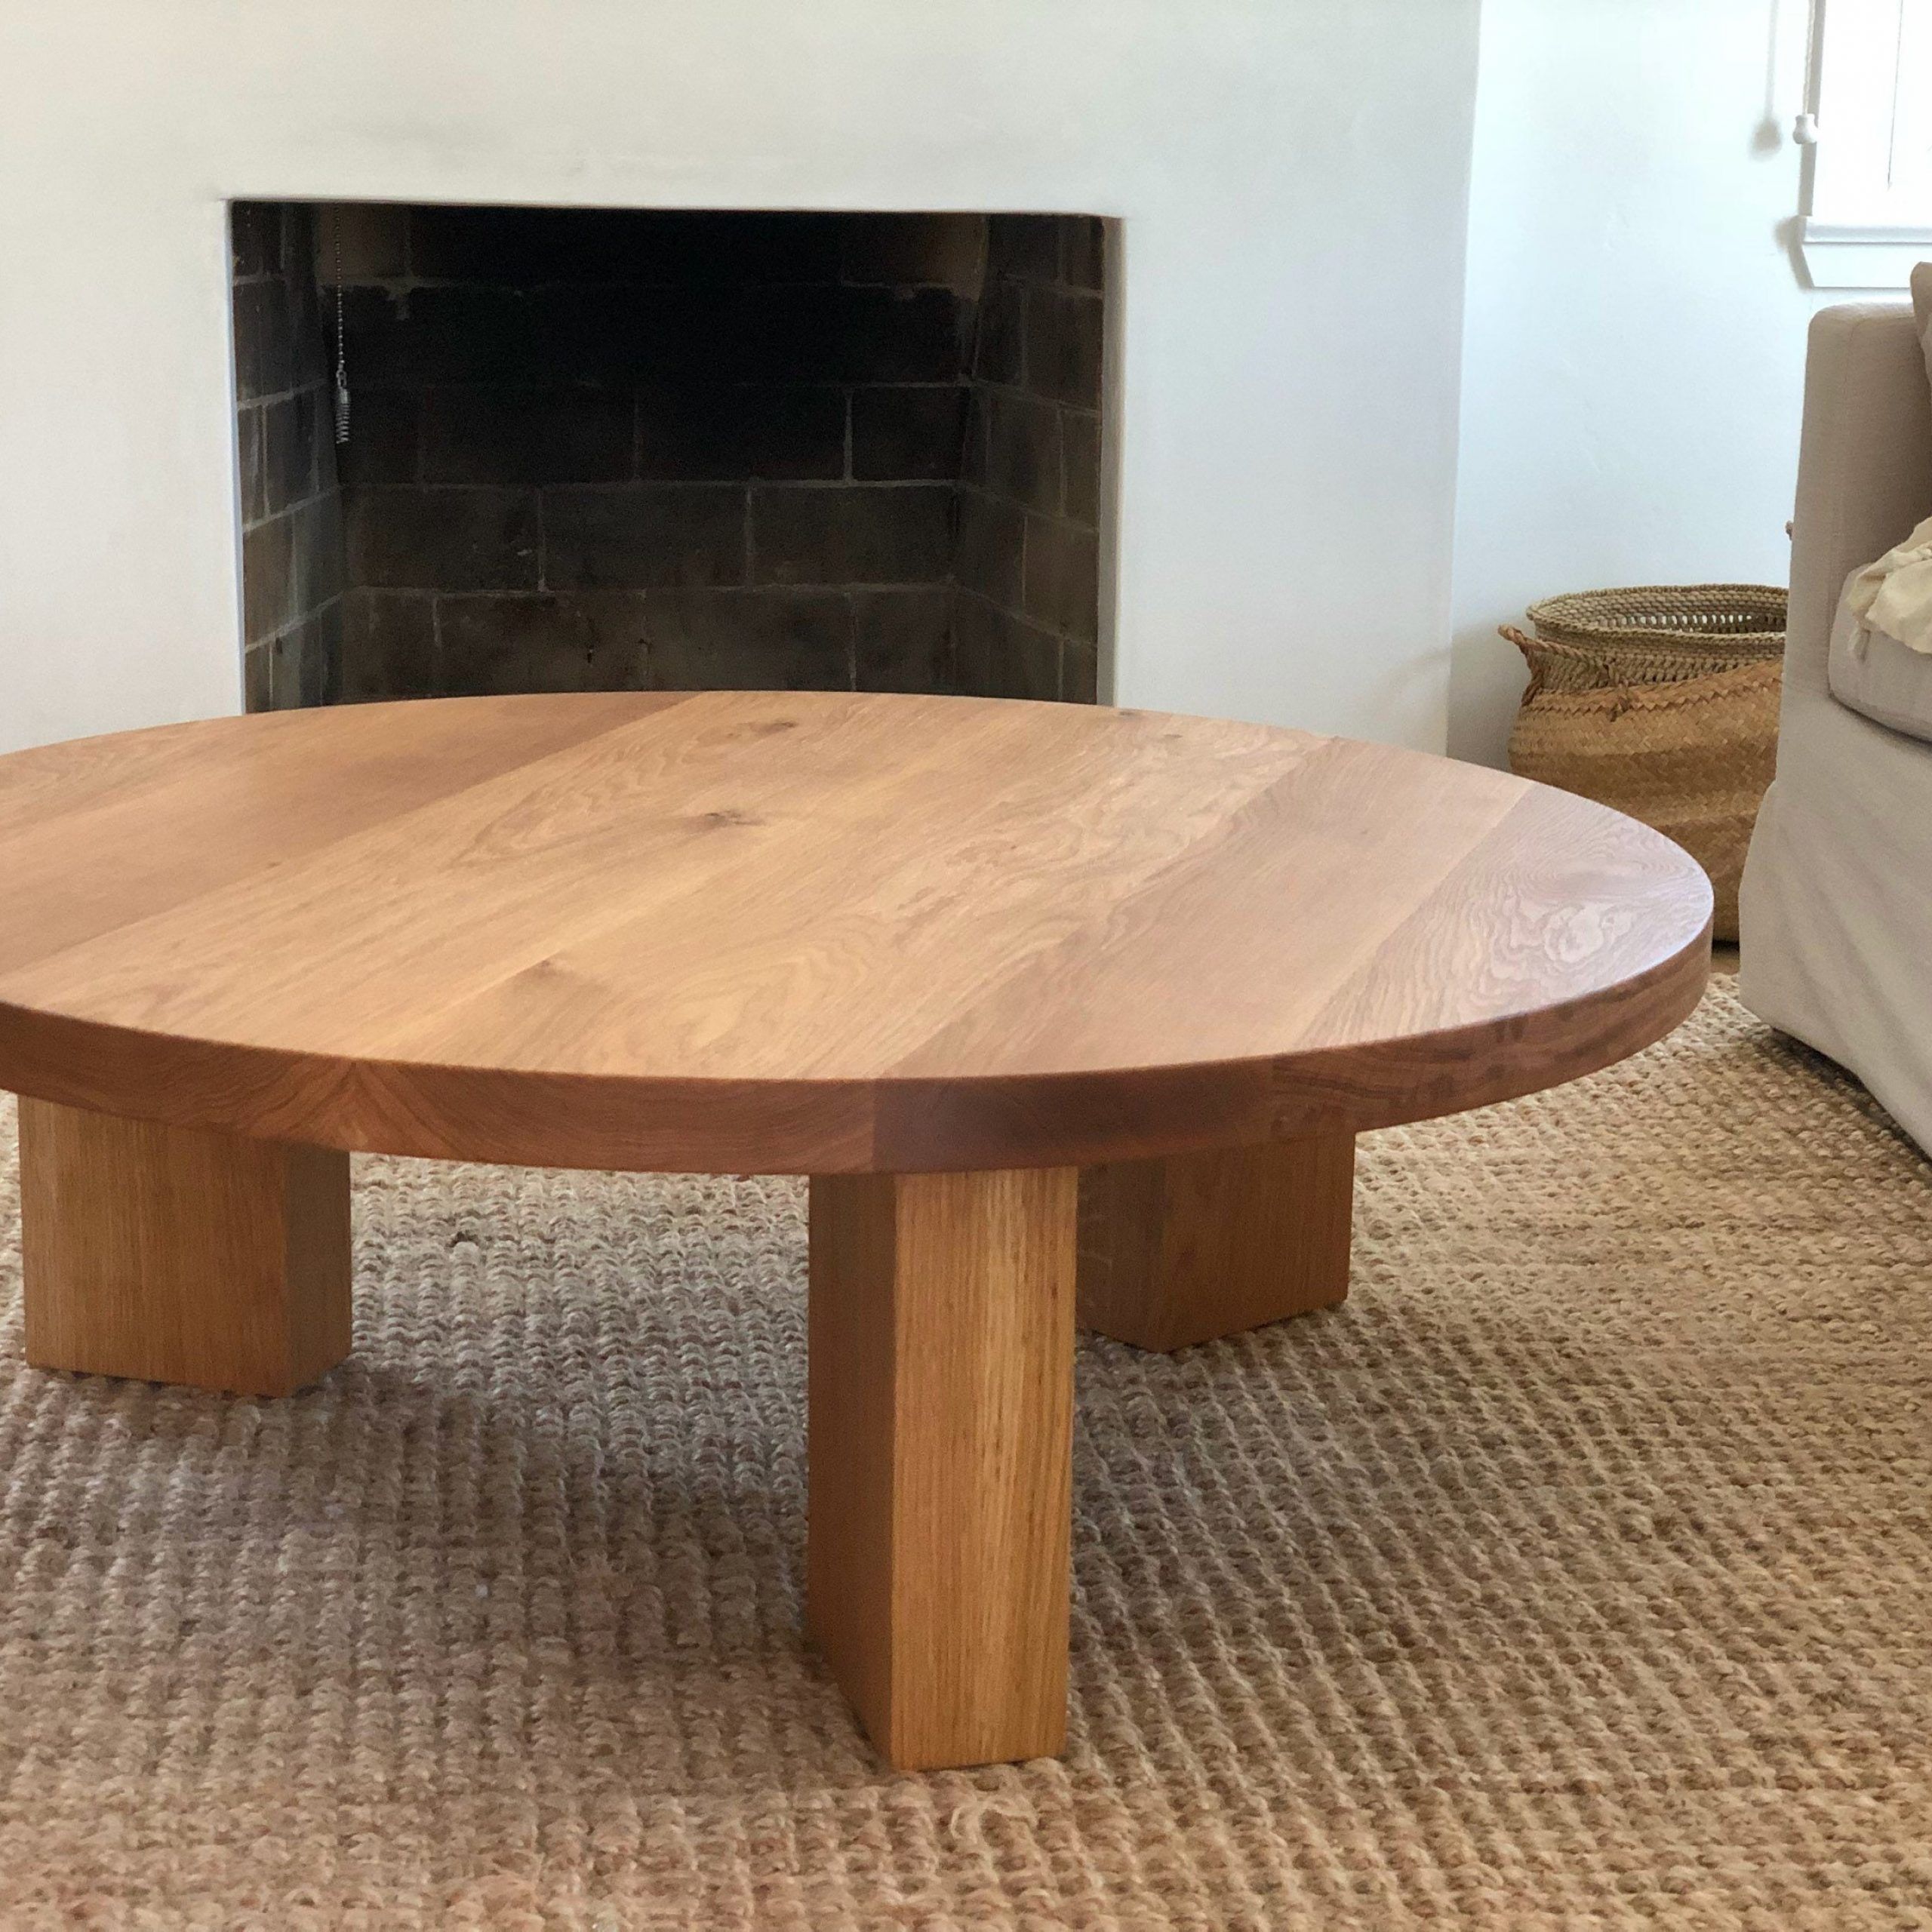 The Og 40 White Oak Modern Round 3 Leg Coffee Table – Etsy With Popular 3 Leg Coffee Tables (View 1 of 20)